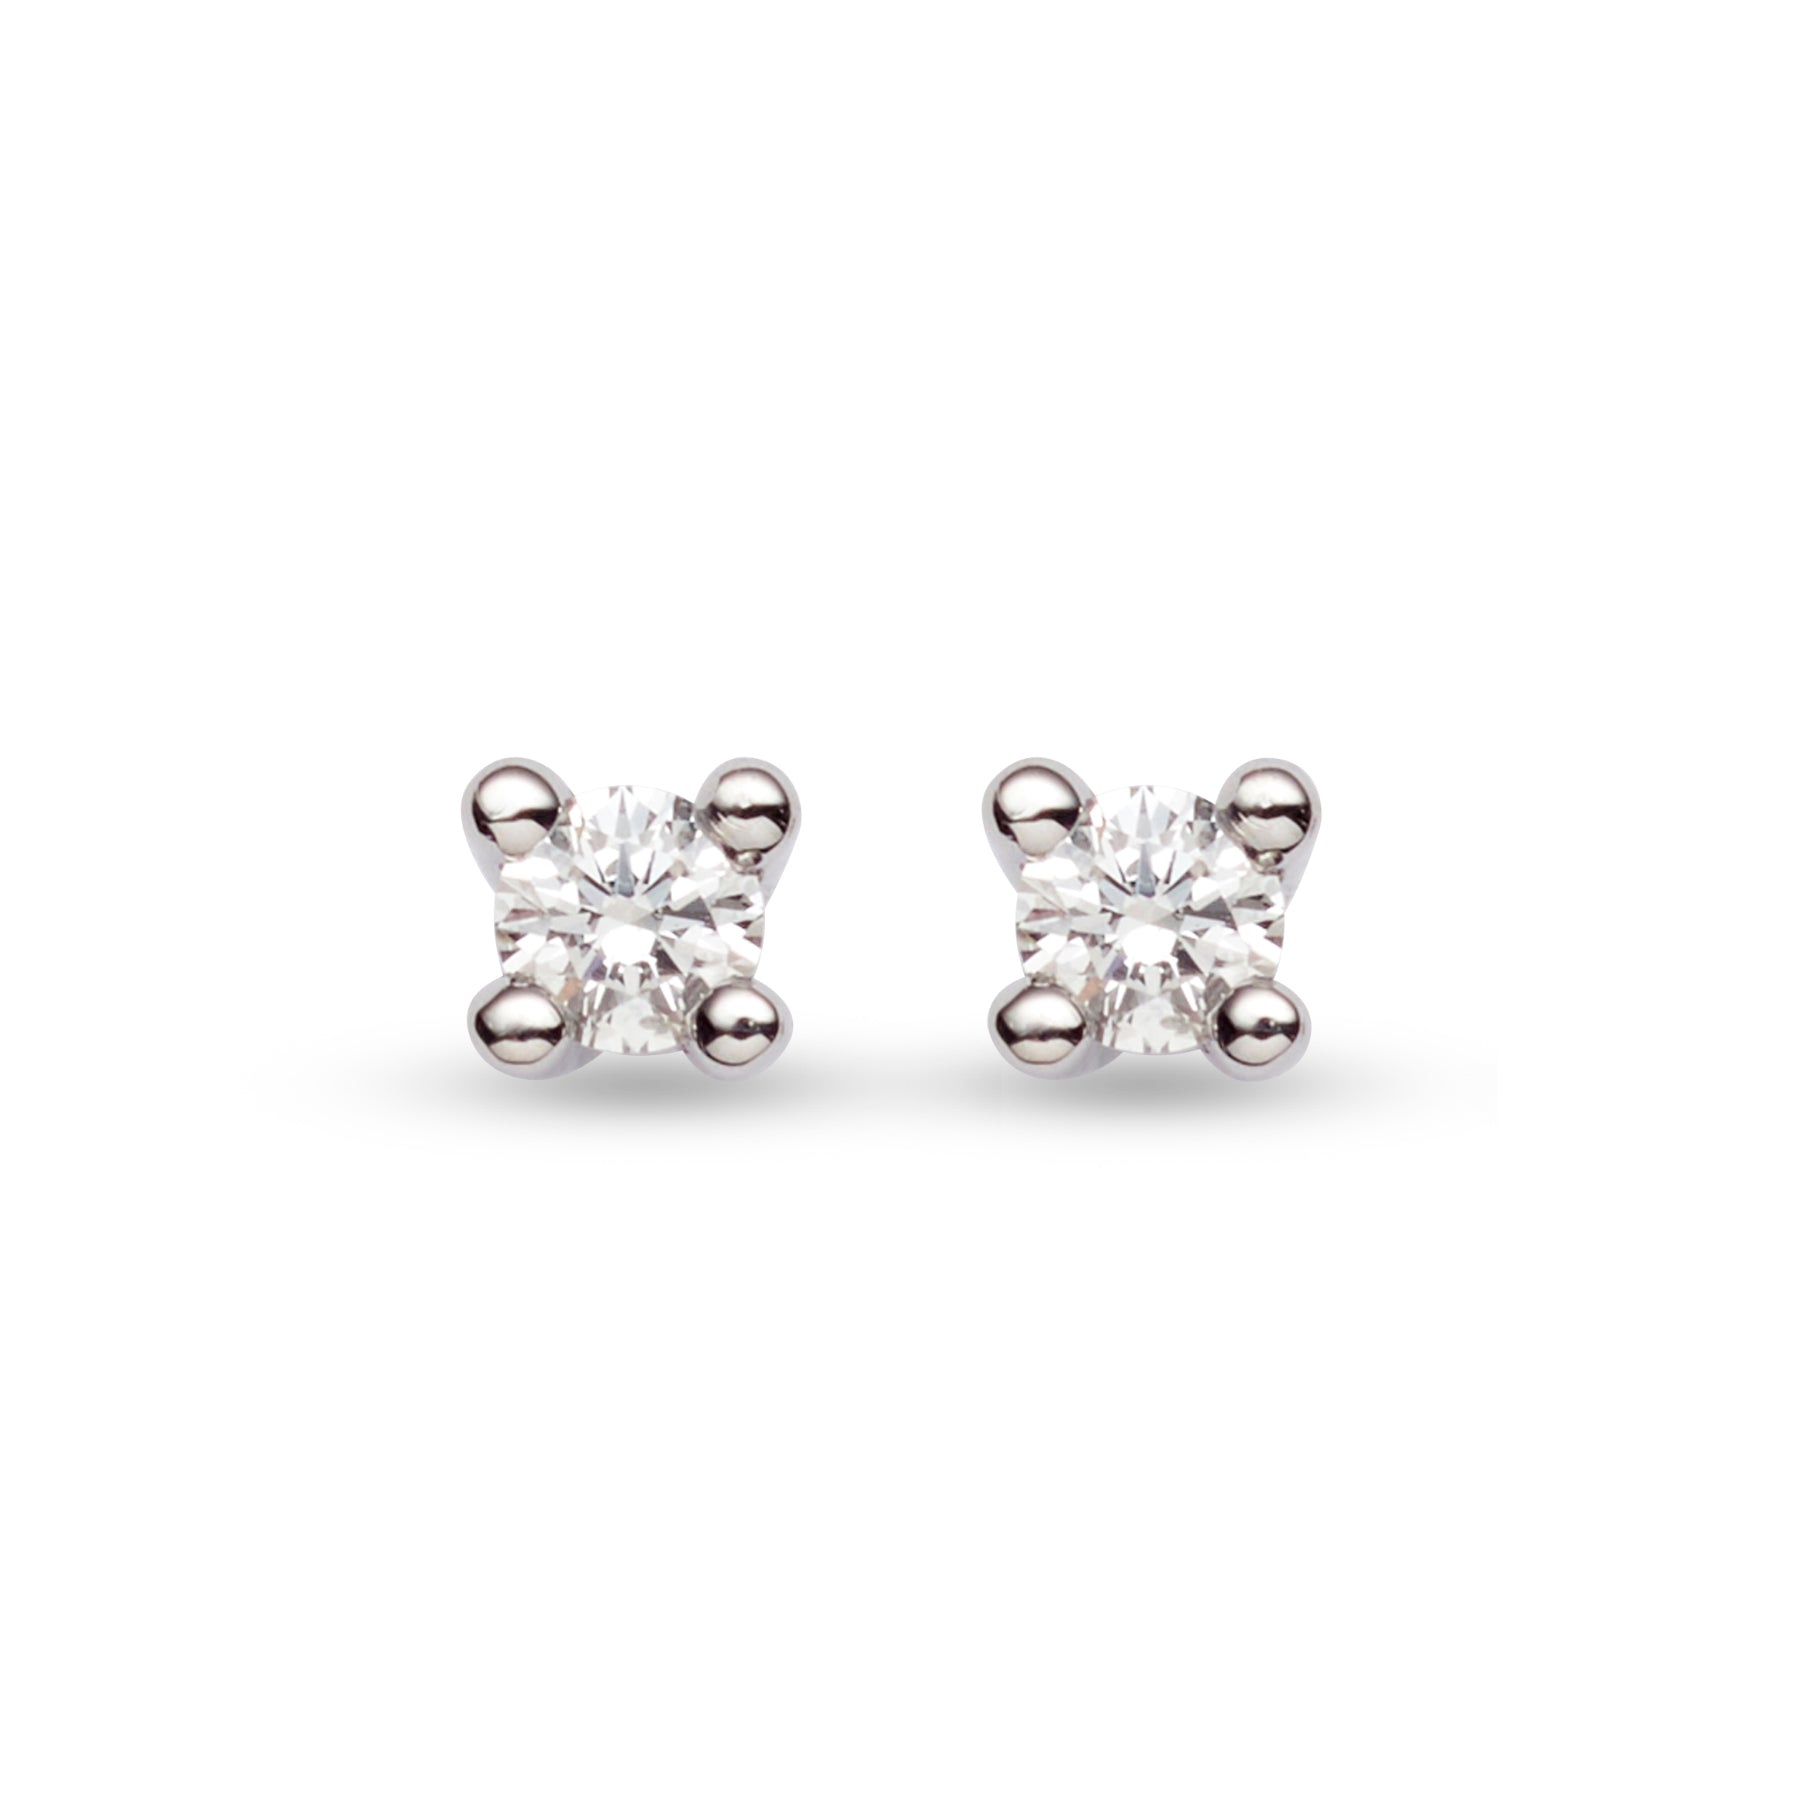 Karin earrings in white gold with diamonds